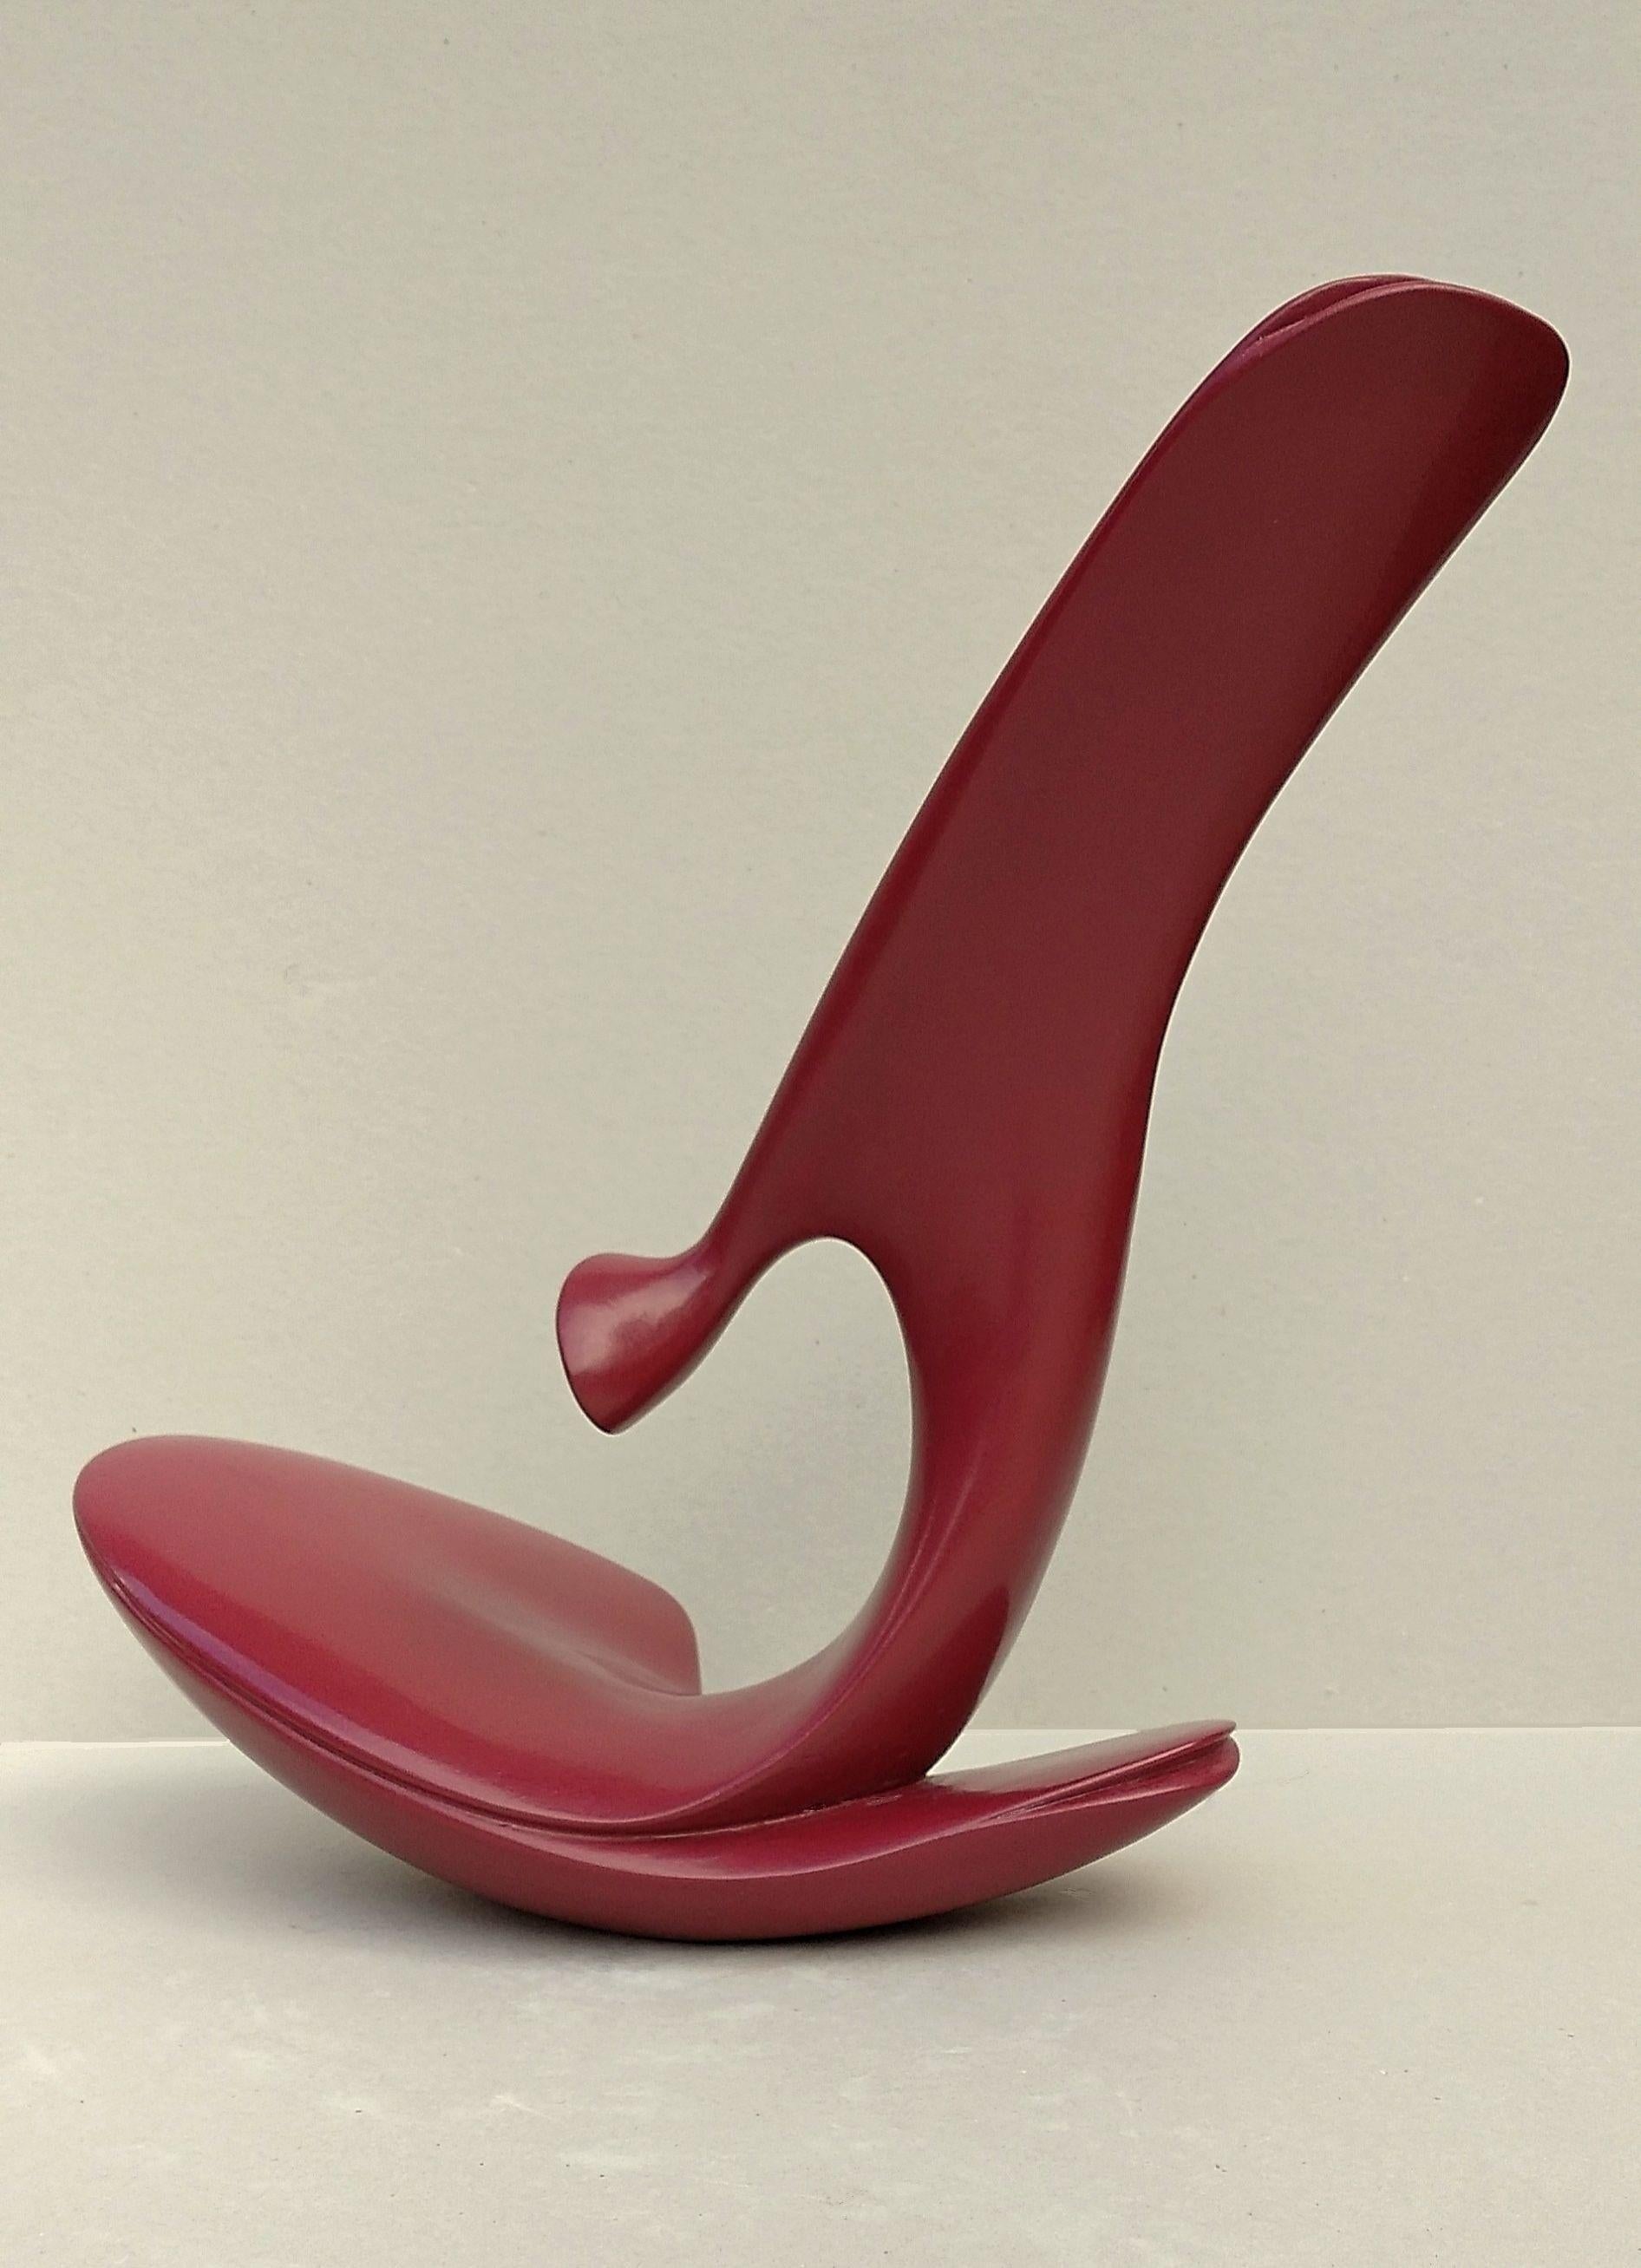 This abstract oak wood sculpture by Lutfi Romhein has been firstly given a patina, then lacquered to highlight its pure lines. Its very professionally lacquered finishing in burgundy red (reference Pantone 187C) gives it a satin appearance and a